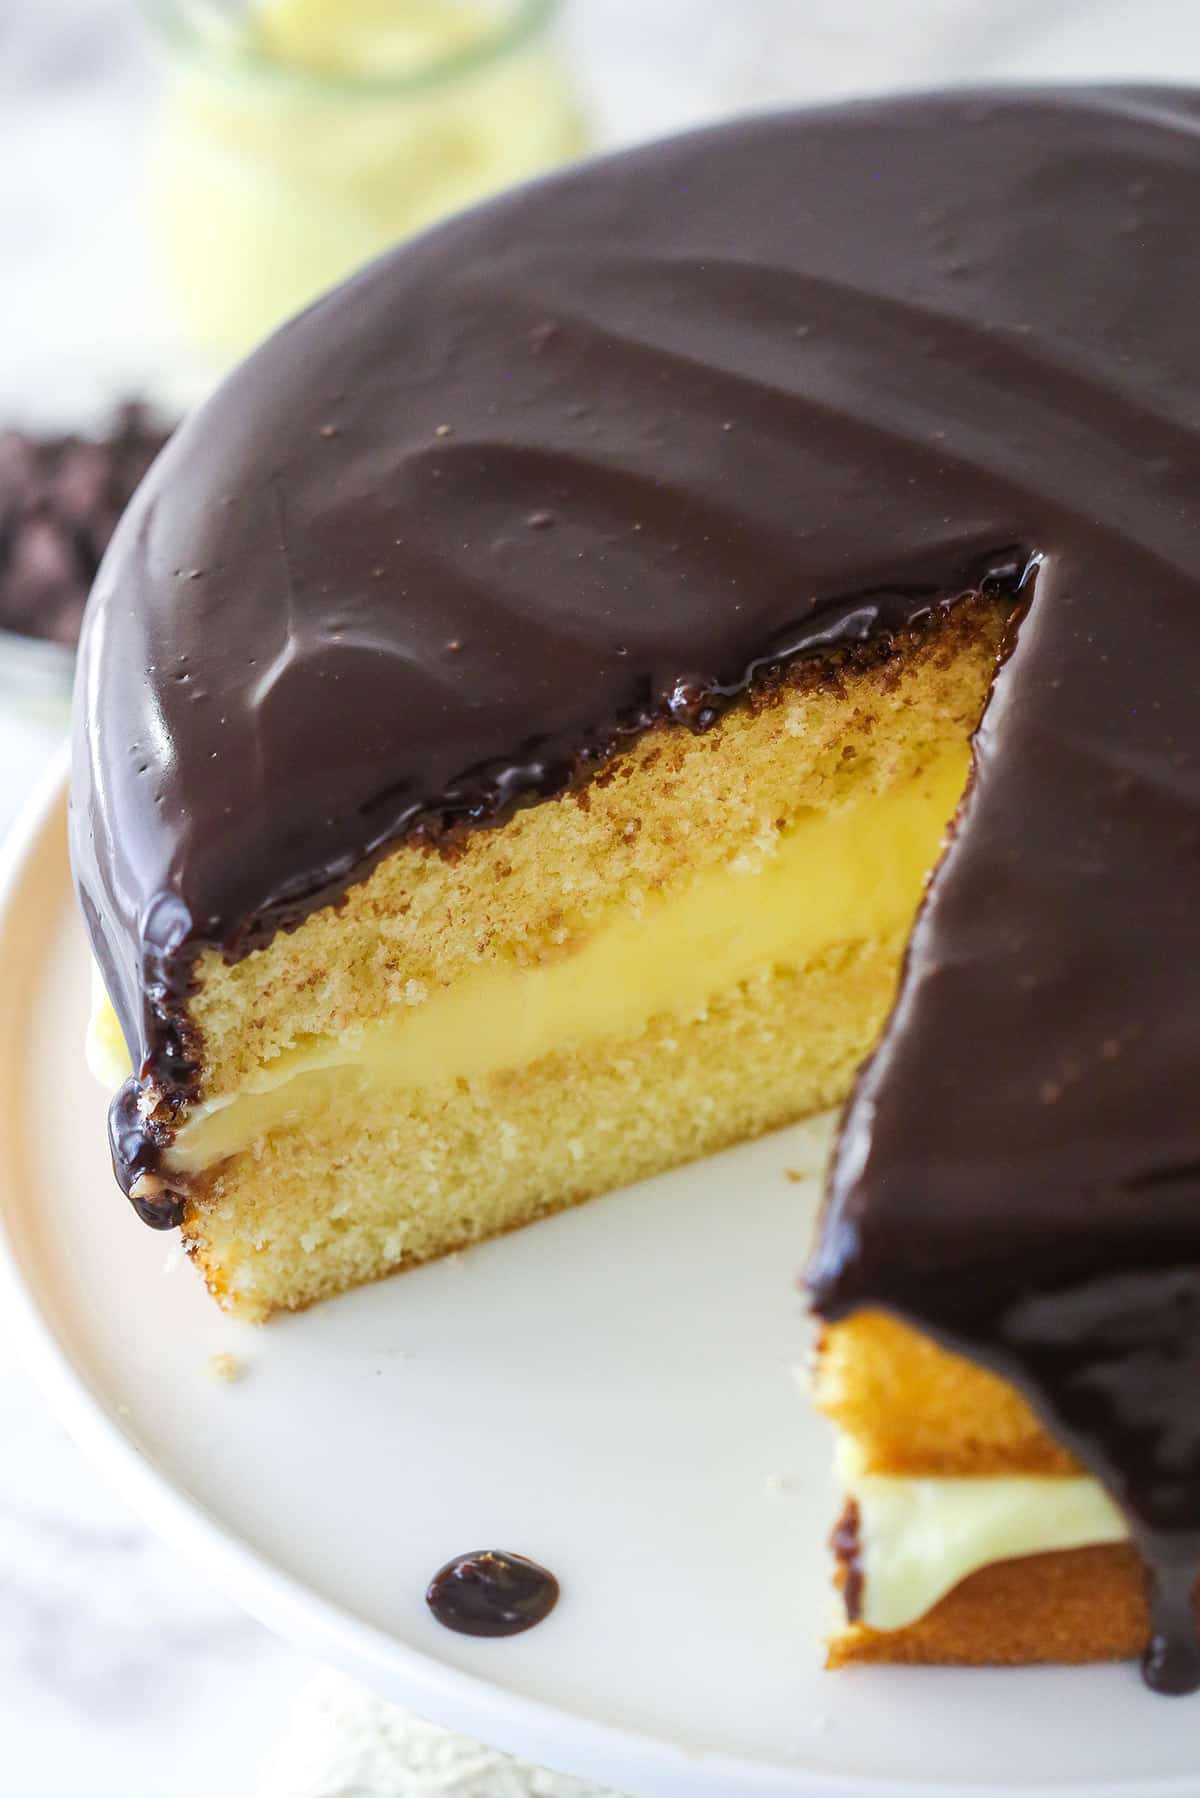 Overhead image of Boston cream pie on a cake stand with a slice taken out of it.